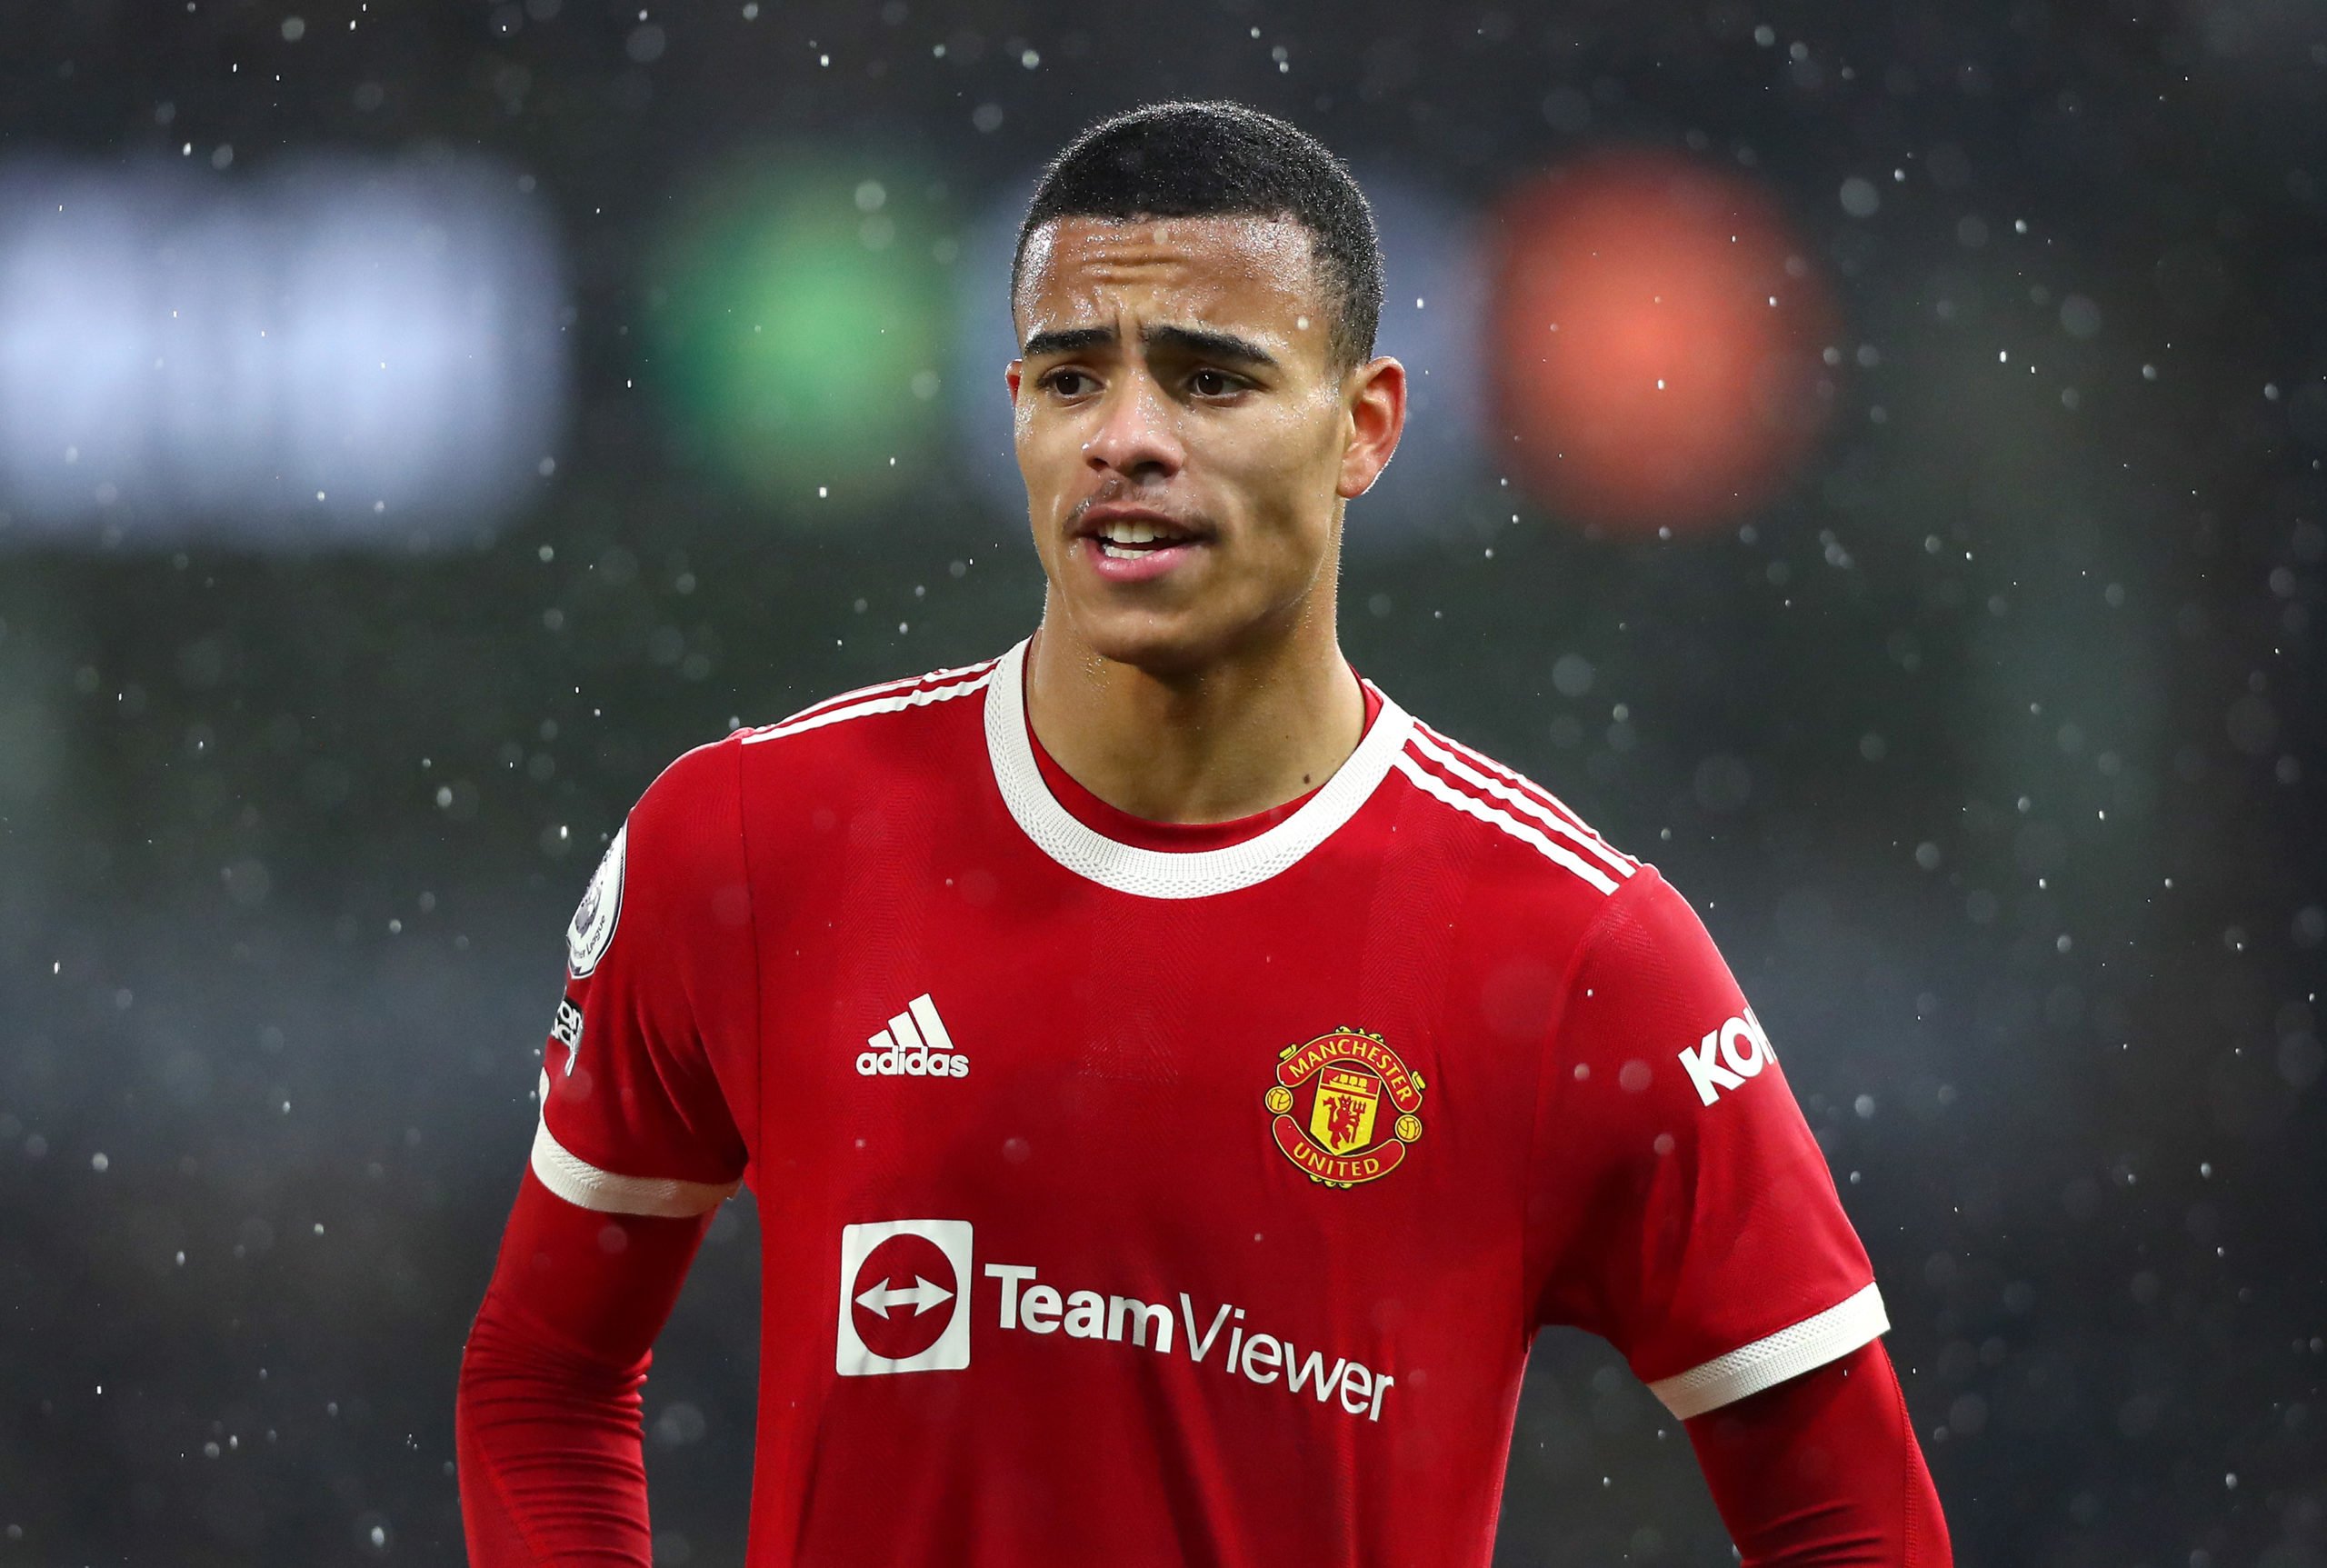 Mason Greenwood speaks out after charges against him are dropped